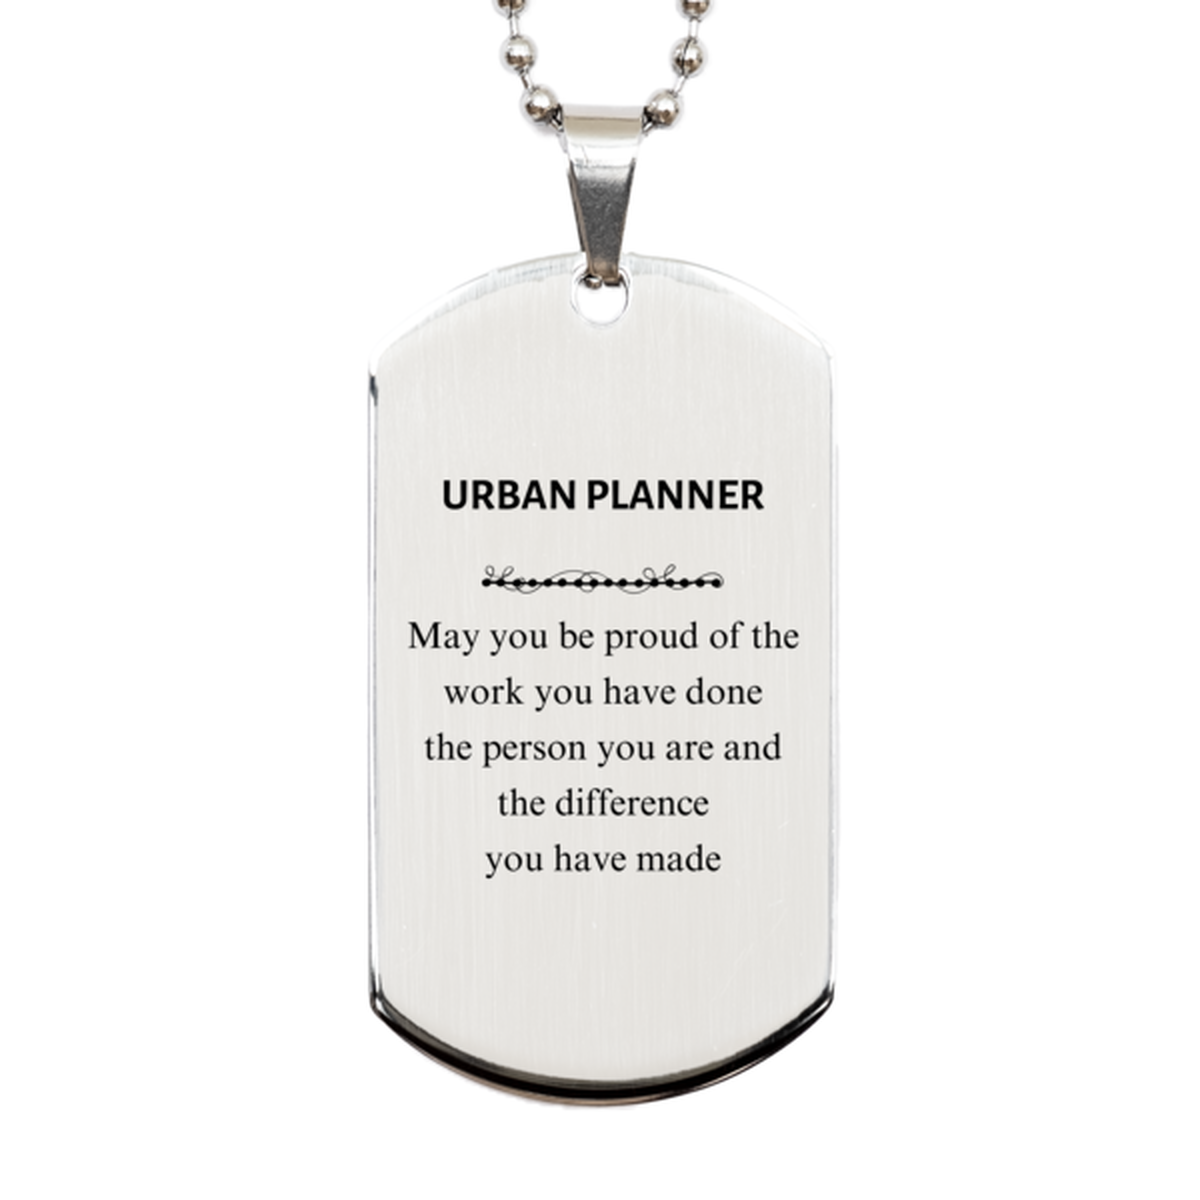 Urban Planner May you be proud of the work you have done, Retirement Urban Planner Silver Dog Tag for Colleague Appreciation Gifts Amazing for Urban Planner